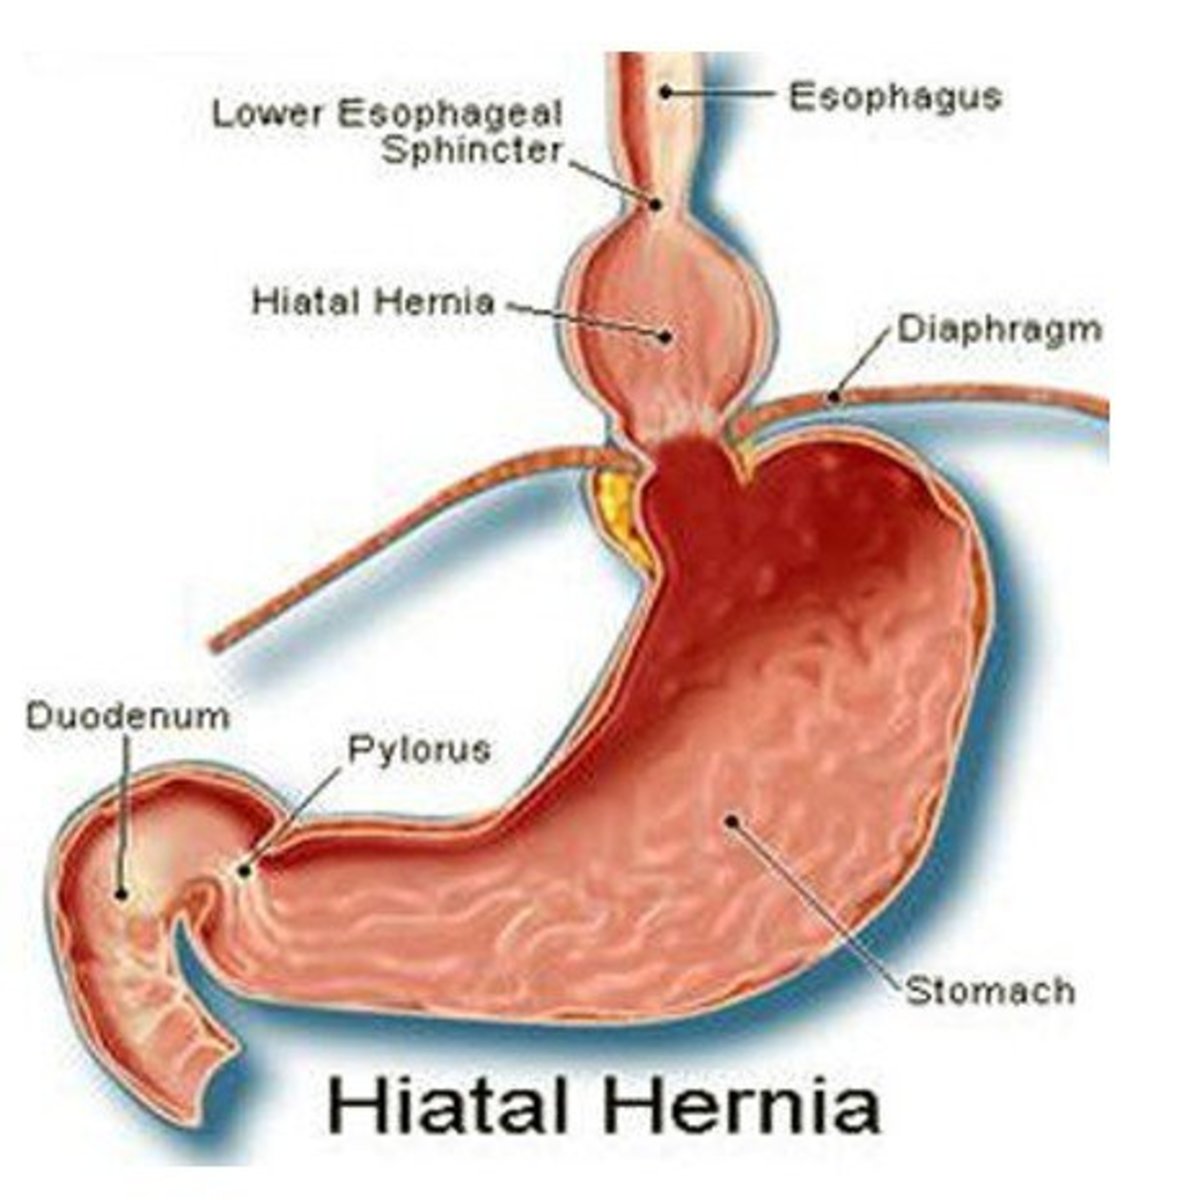 hiatal-hernia-pictures-symptoms-treatment-recovery-time-surgery